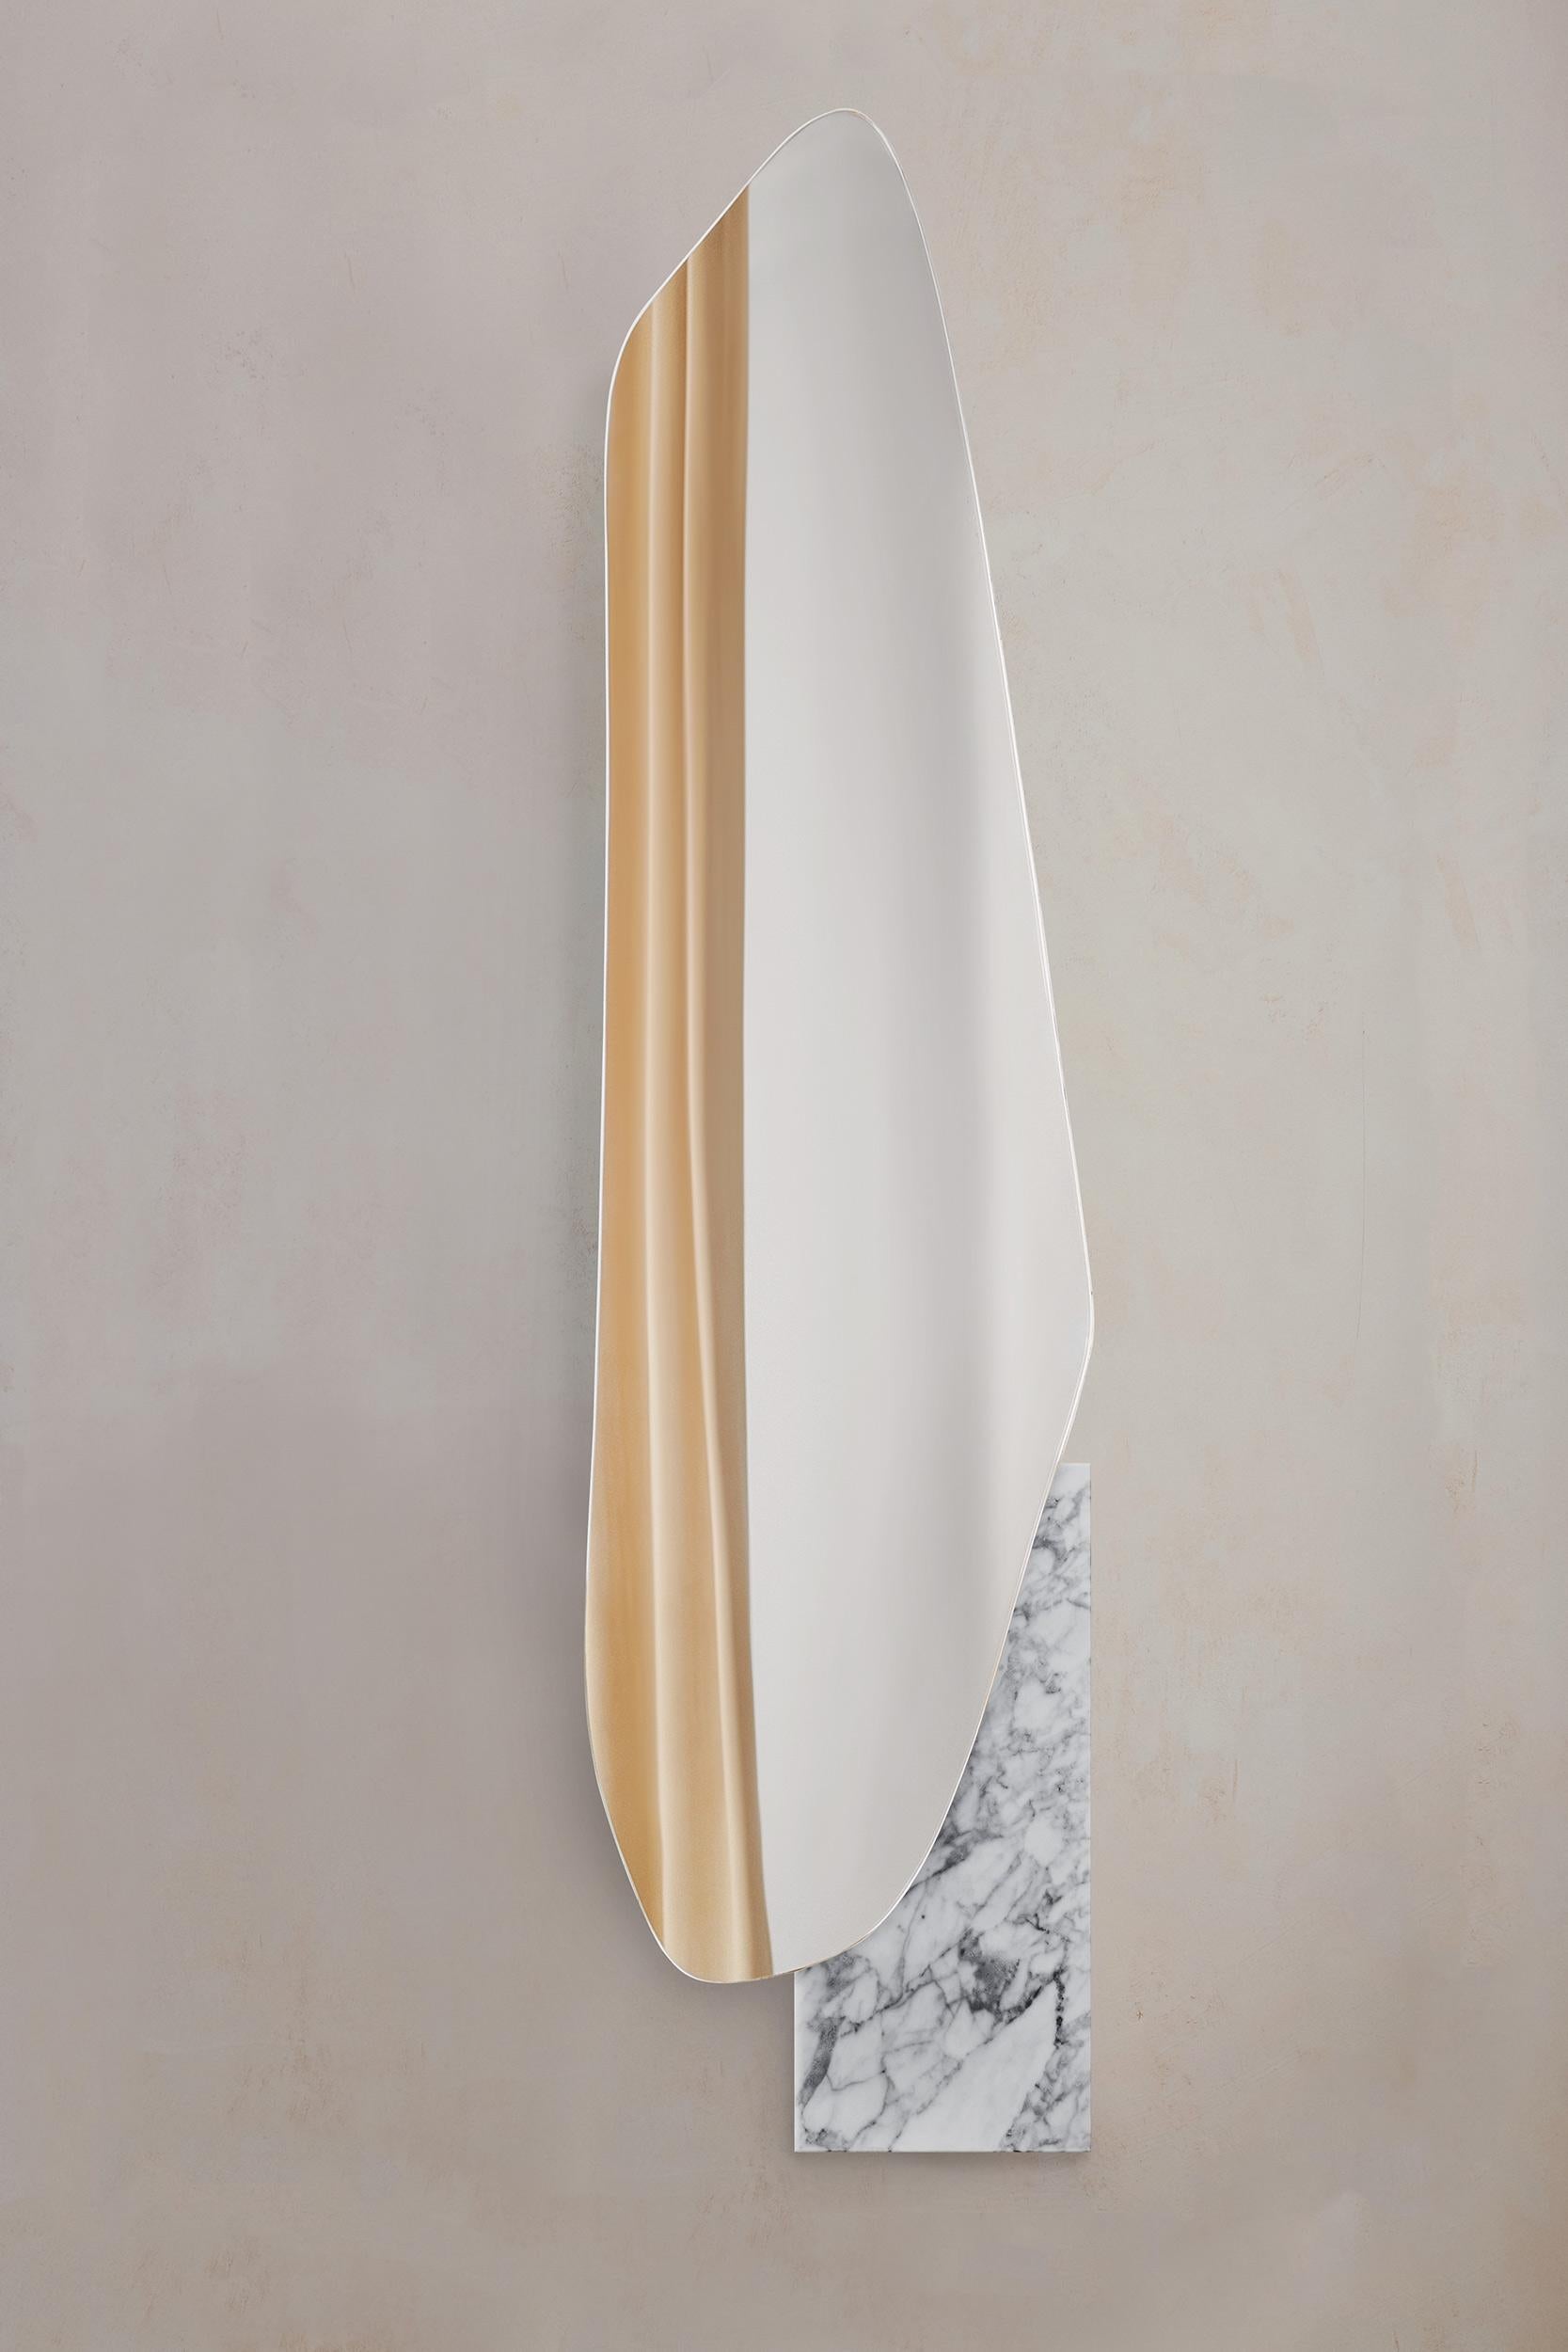 Modern Lake Wall Mirror by Noom
Designers: Maryna Dague & Nathan Baraness

Model shown in picture:
Number 2
Base in white marble statuario

